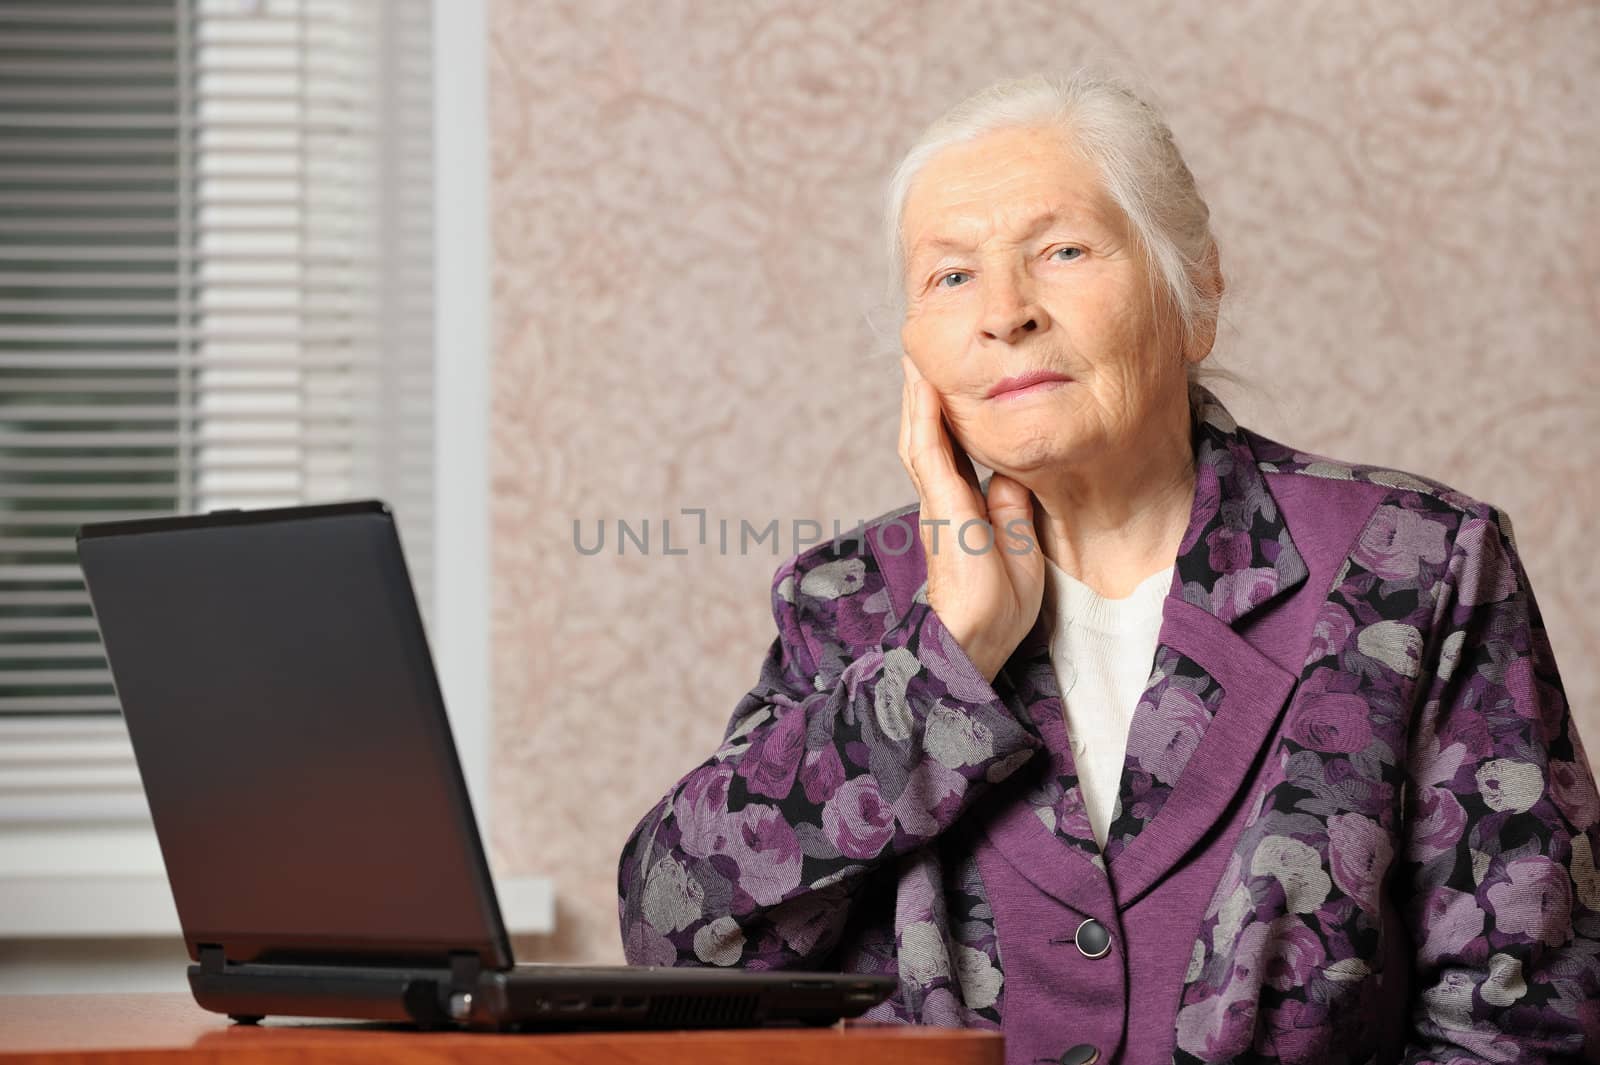 The elderly woman in front of the laptop by galdzer